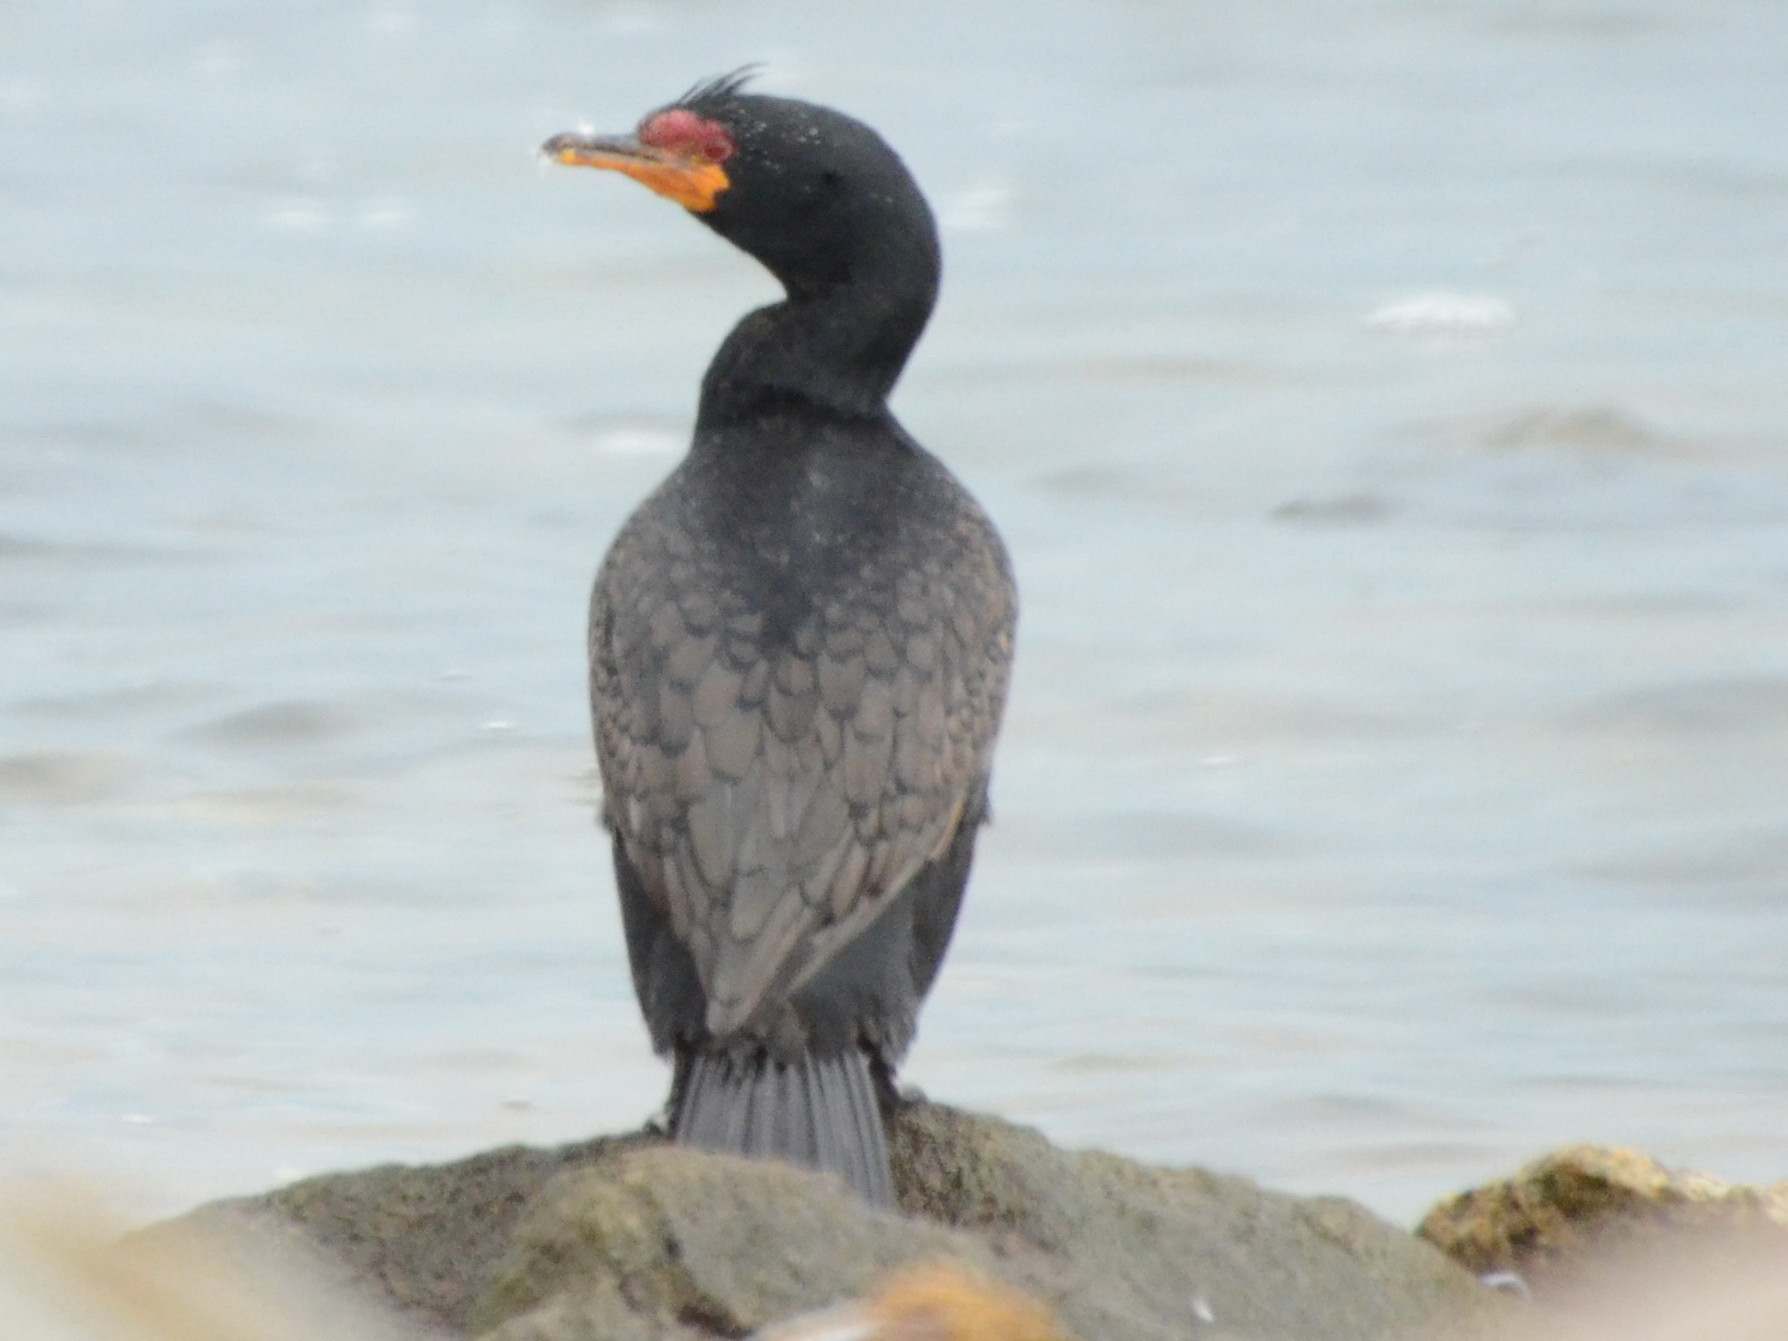 Click picture to see more Crowned Cormorants.